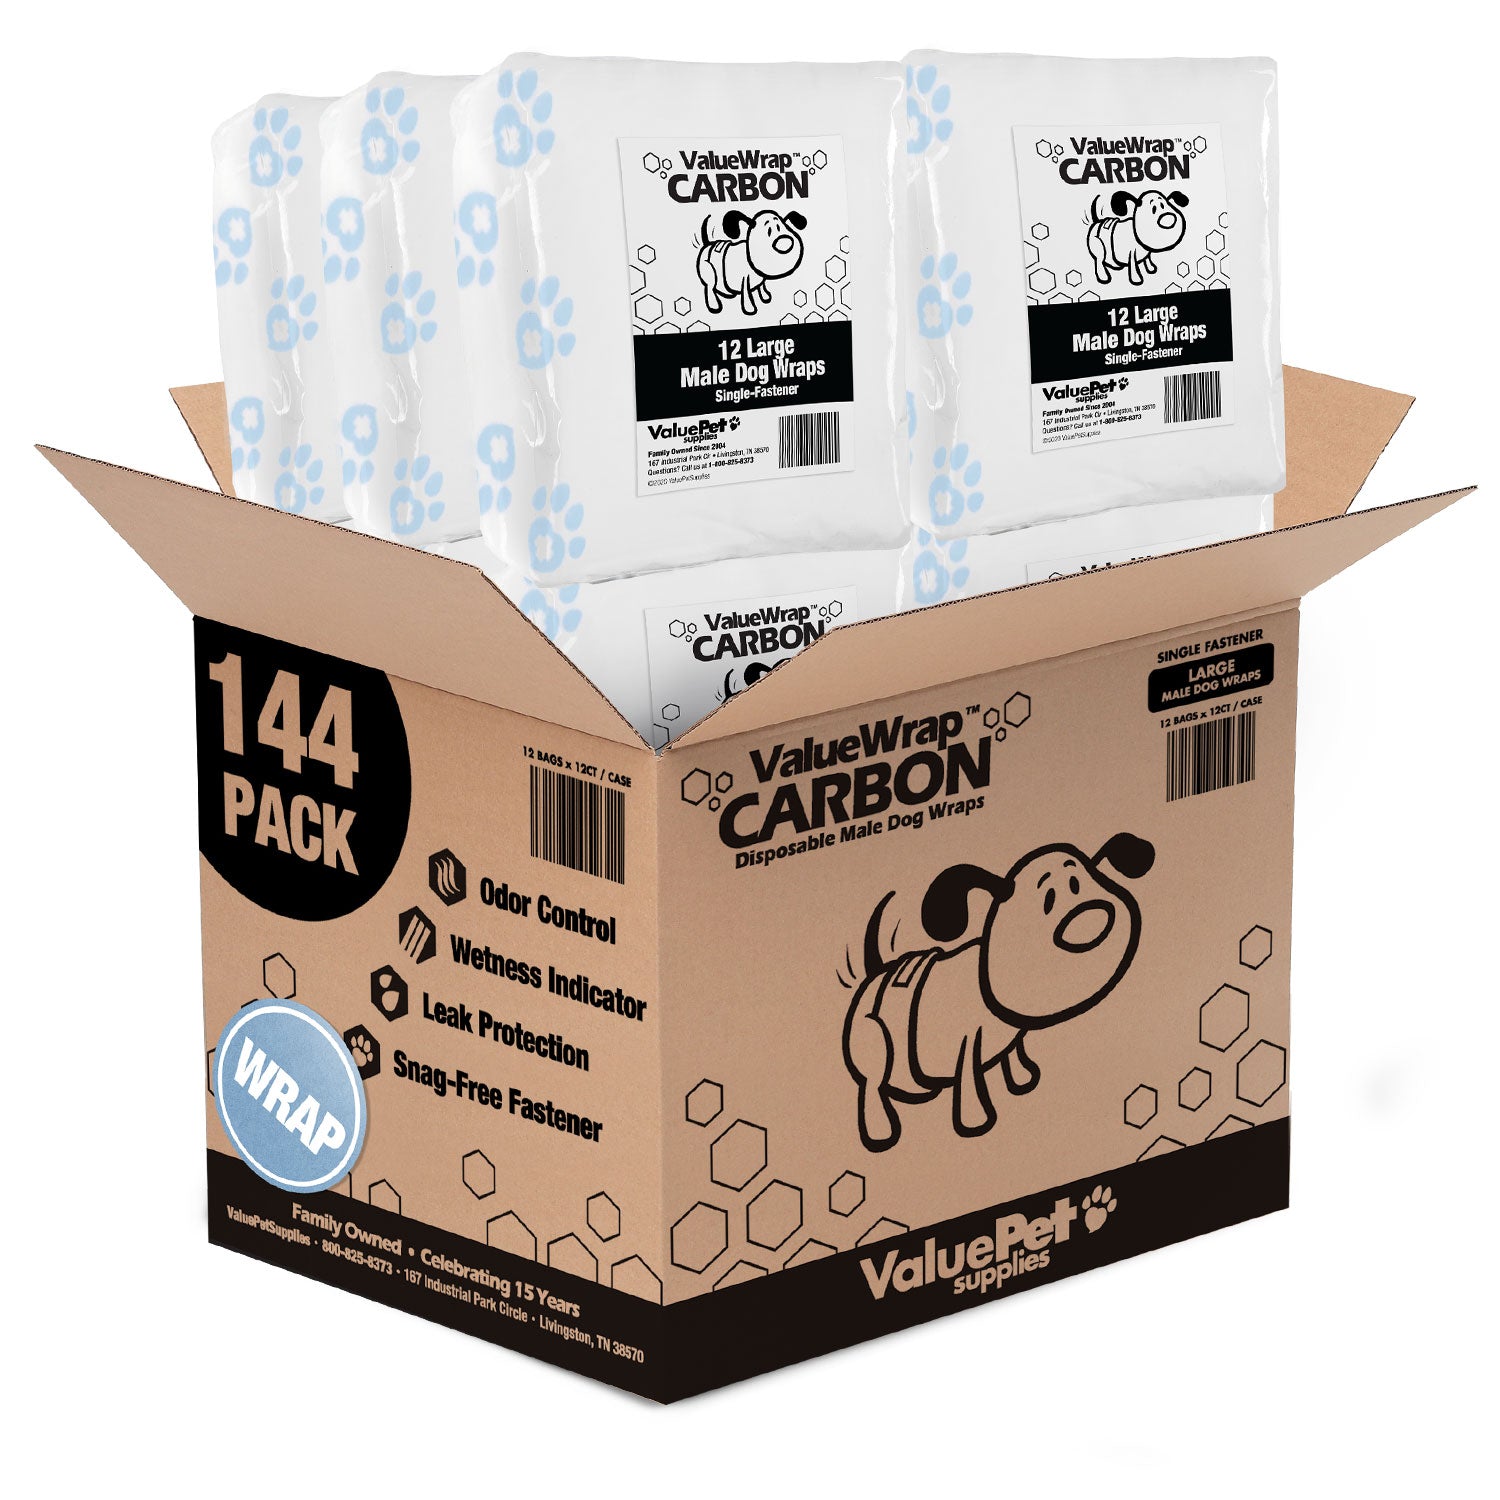 ValueWrap Male Wraps, Disposable Dog Diapers, Carbon, 1-Tab Large, 144 Count